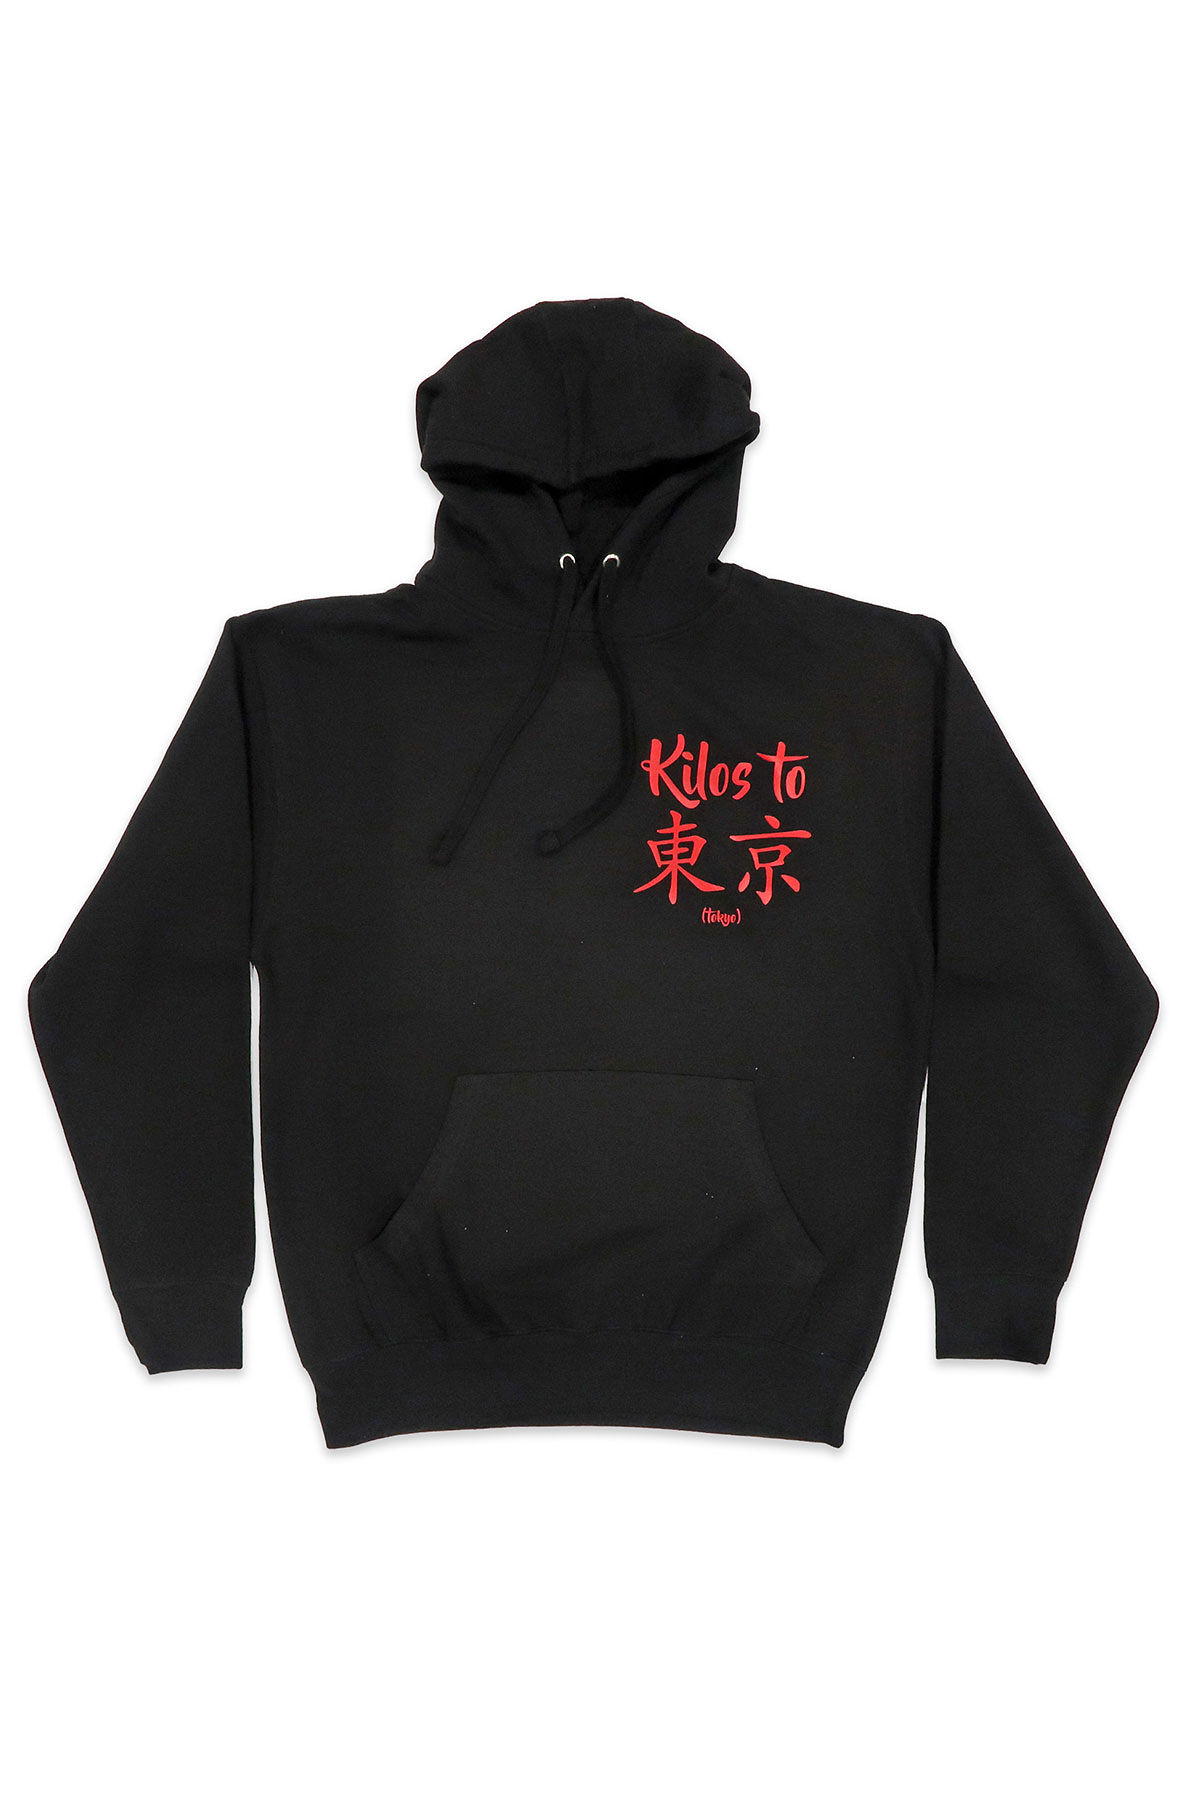 kilos to tokyo v2 hoodie in black and red